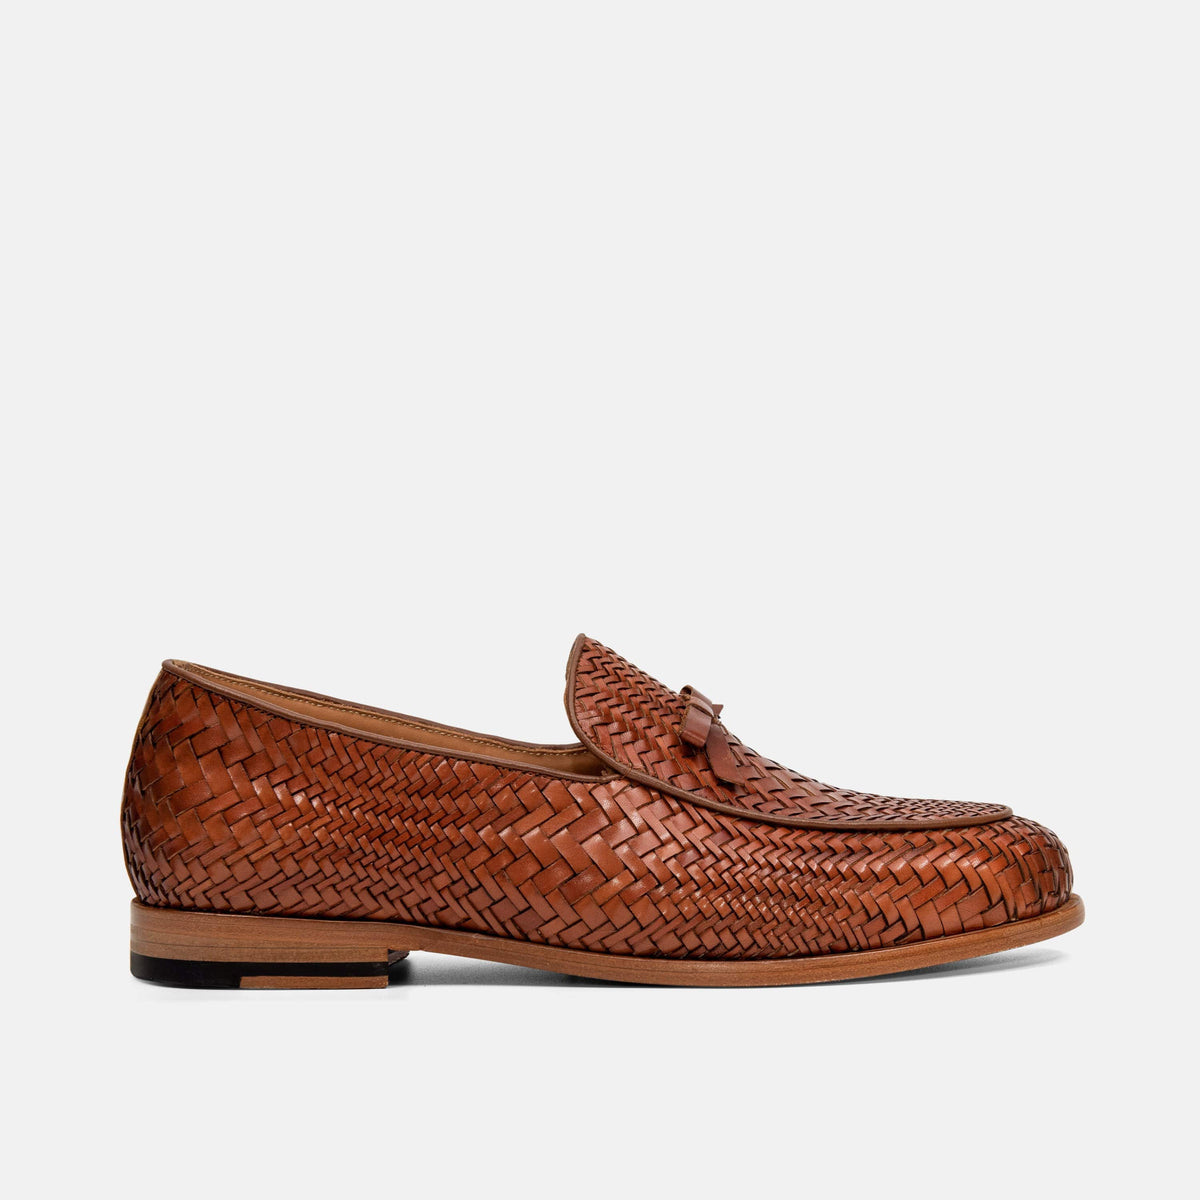 Odell Caramel Woven Leather Belgian Loafers - Marc Nolan